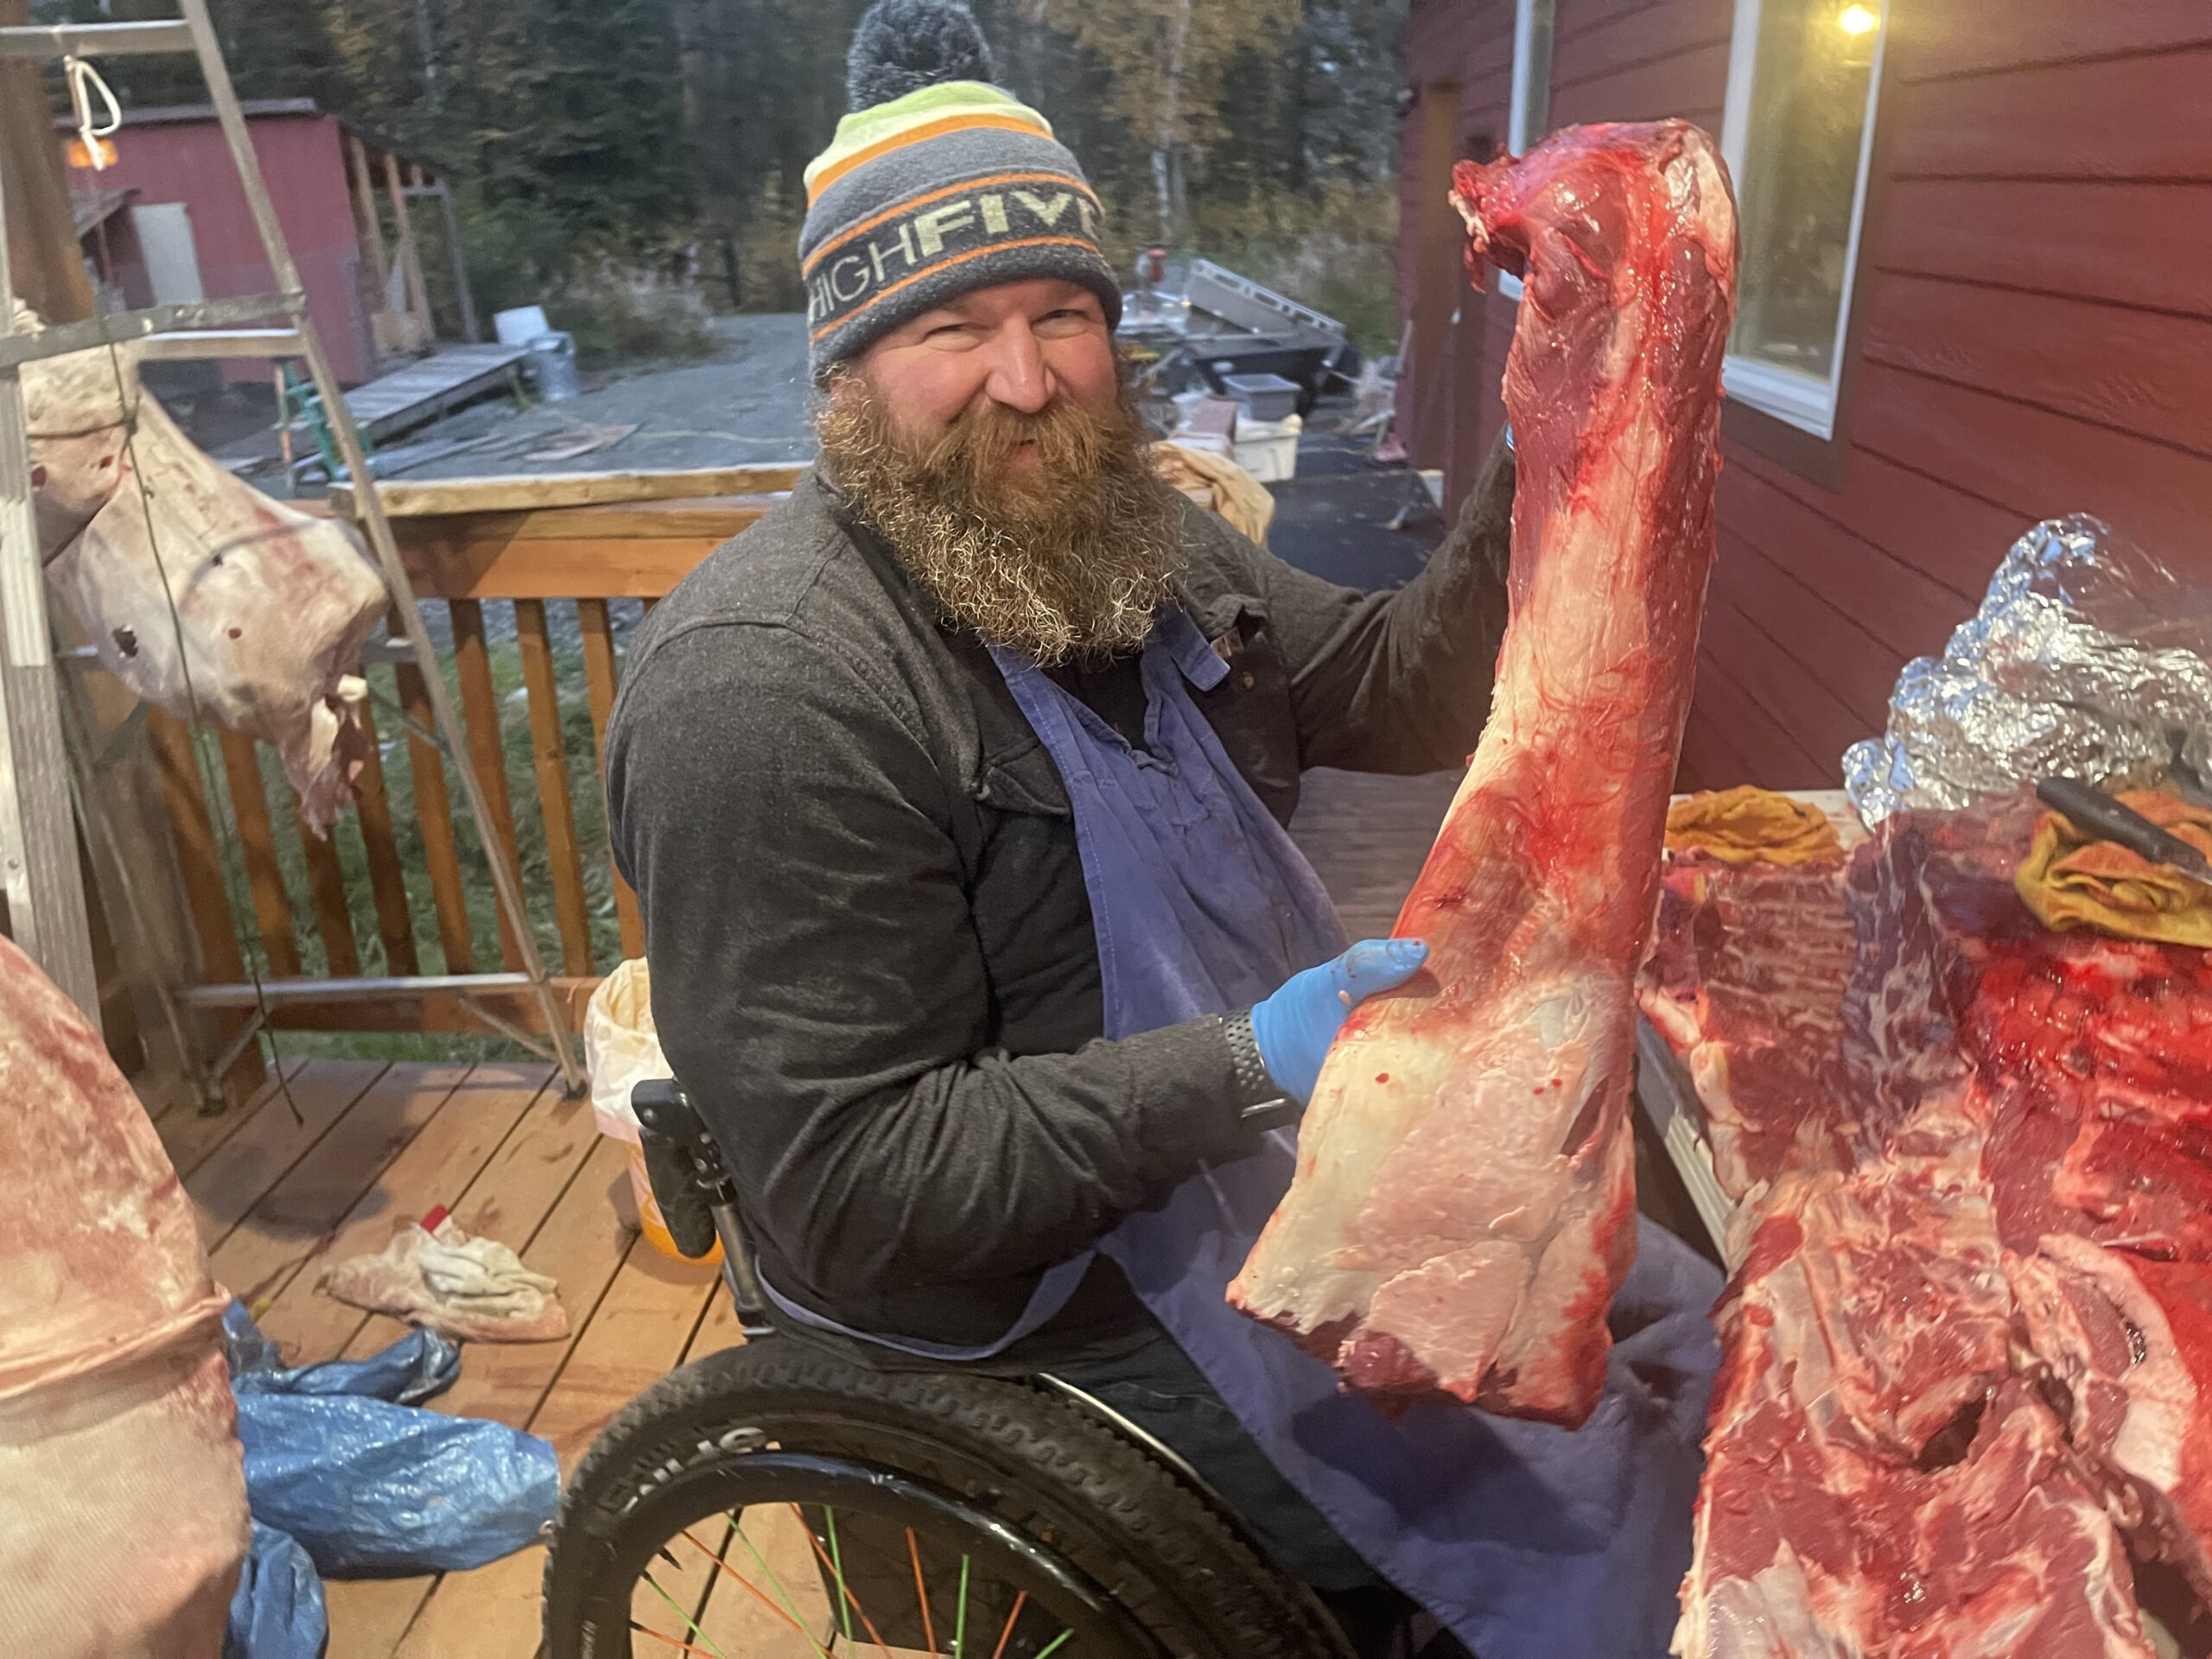 A bearded man in a wheelchair holds up a piece of meat.